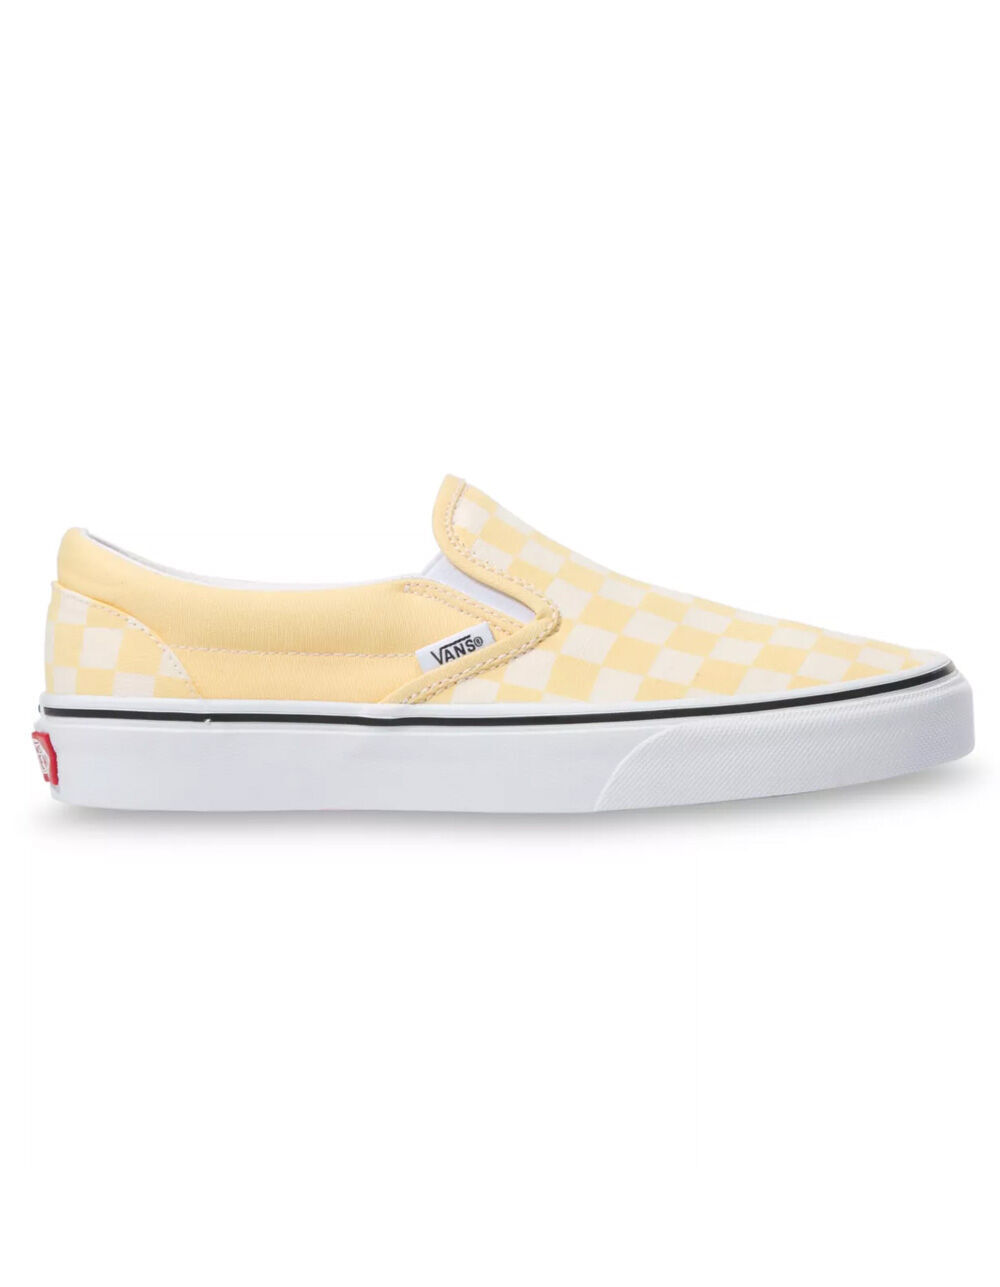 White and yellow checkered shoes  Leather shoes woman, Slip on sneakers,  Womens shoes wedges